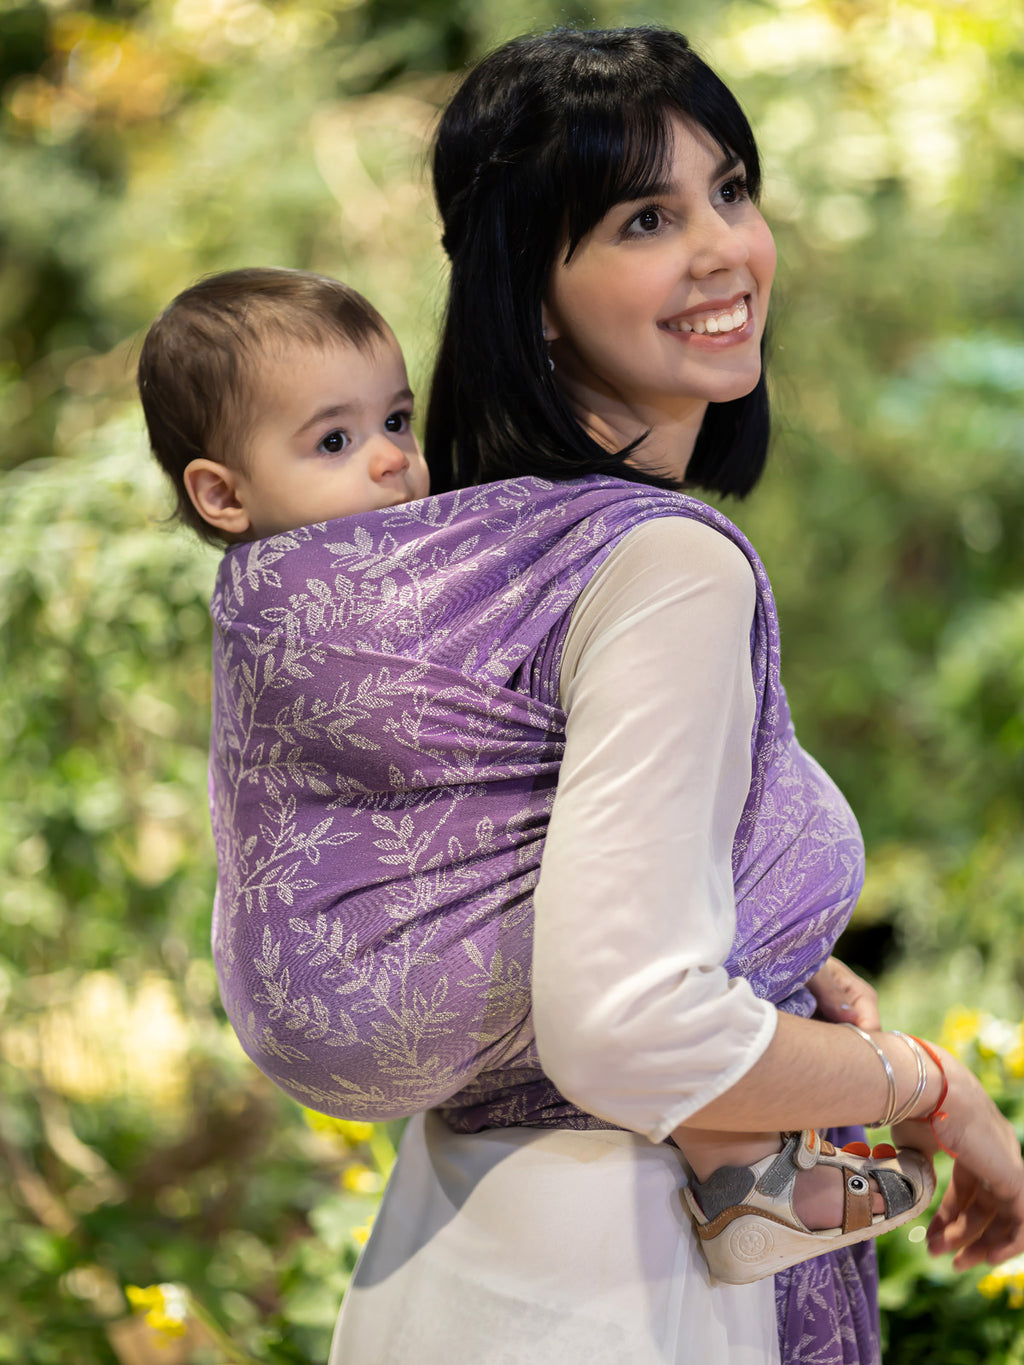 The Common Terms, Abbreviations and Acronyms of Babywearing